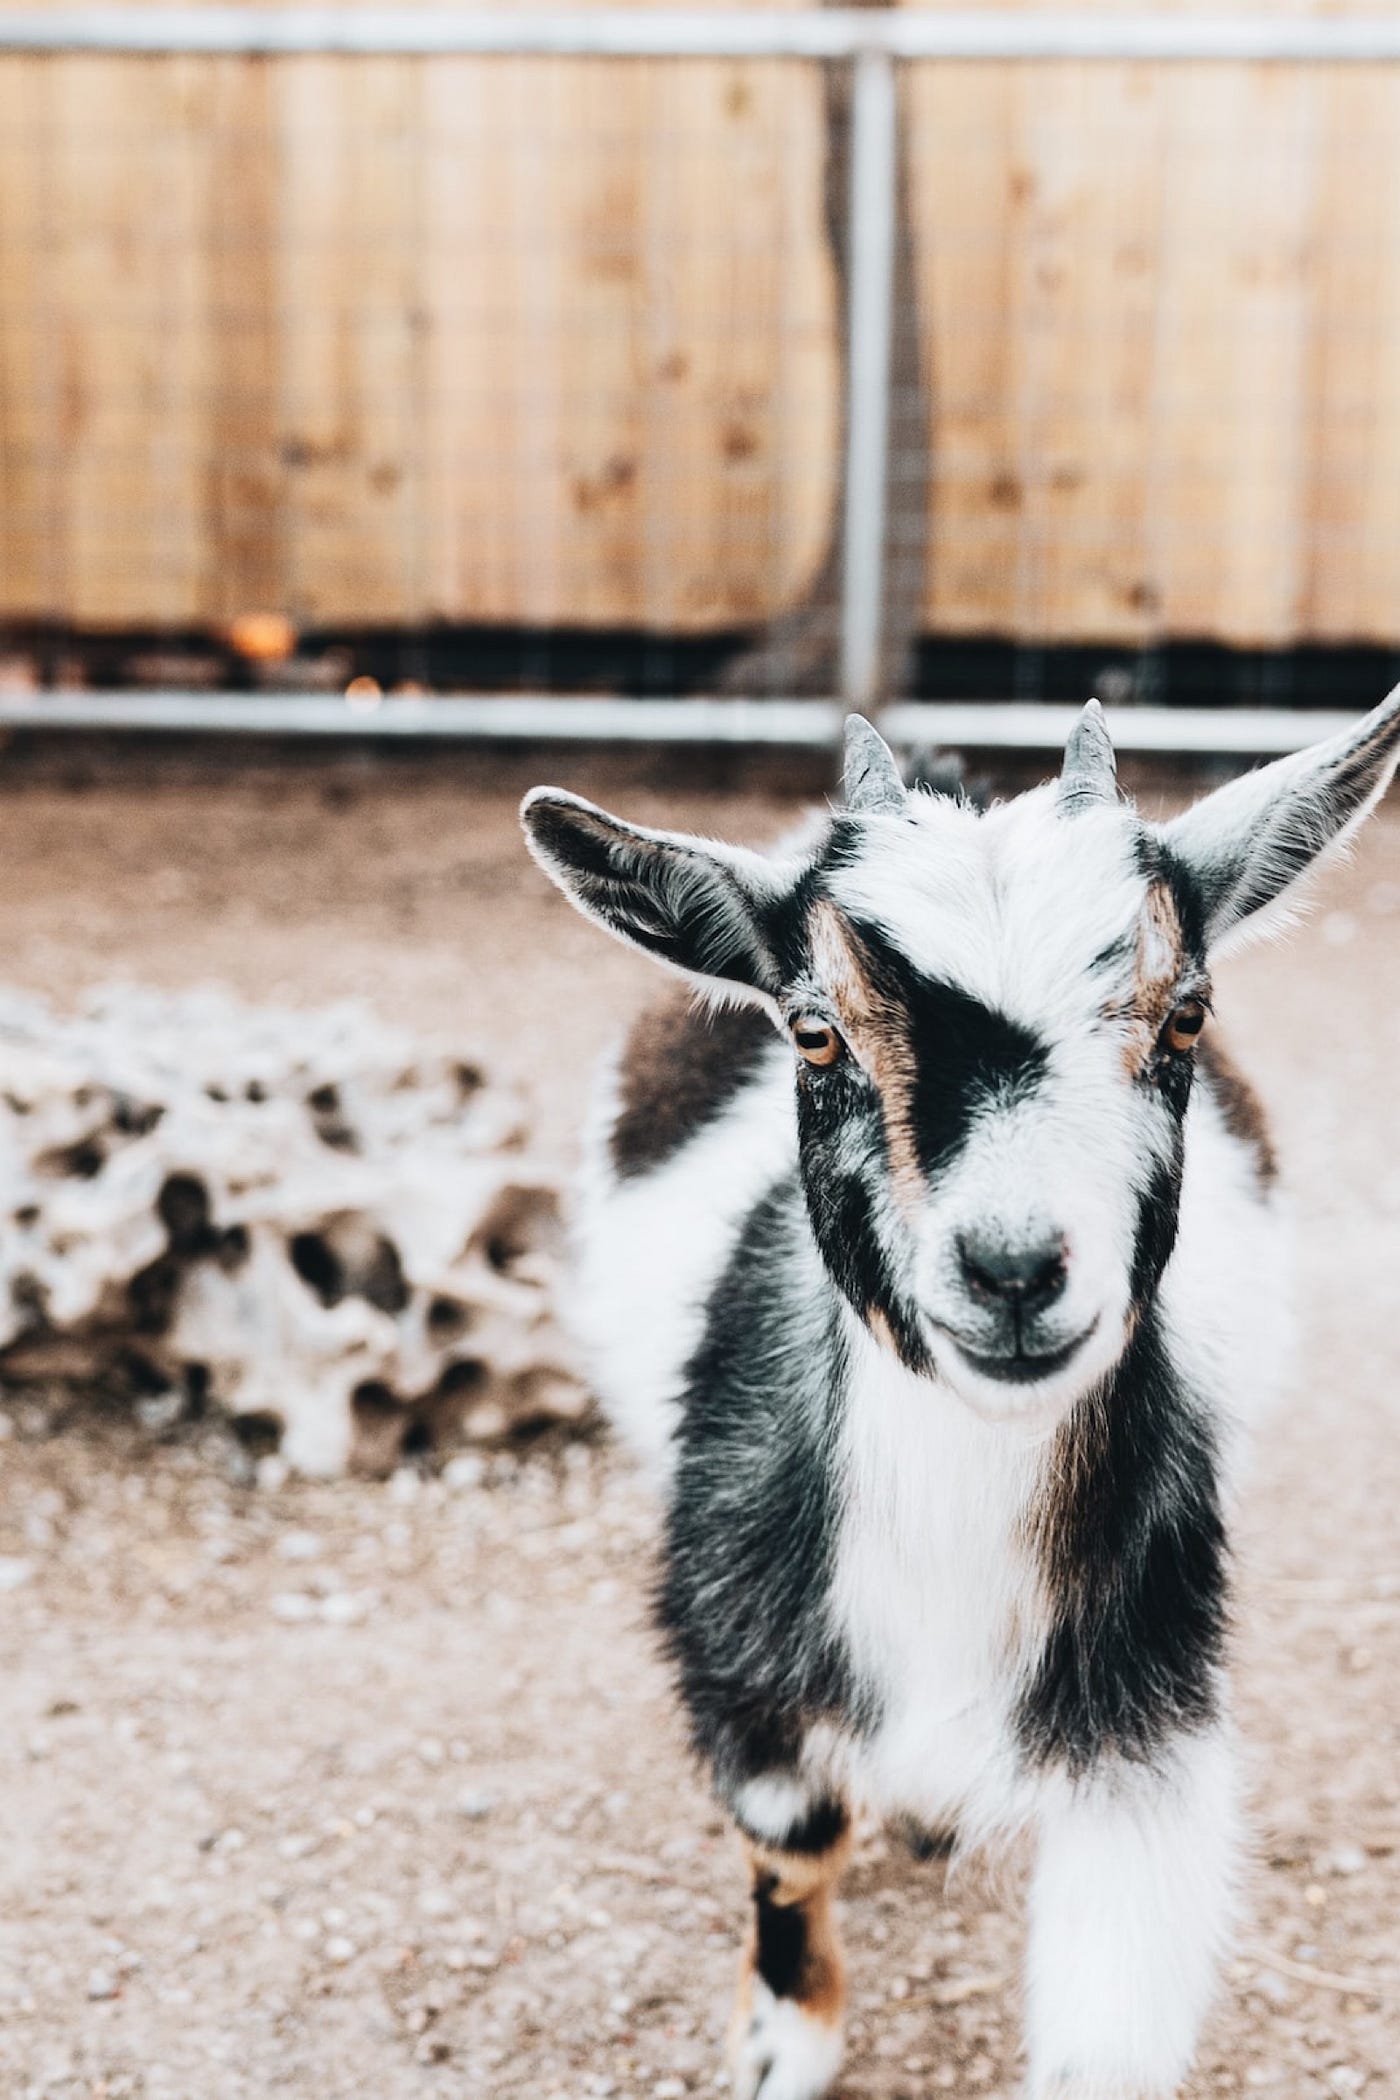 17 Pygmy Goats That Will Melt Your Heart - Weed 'em & Reap